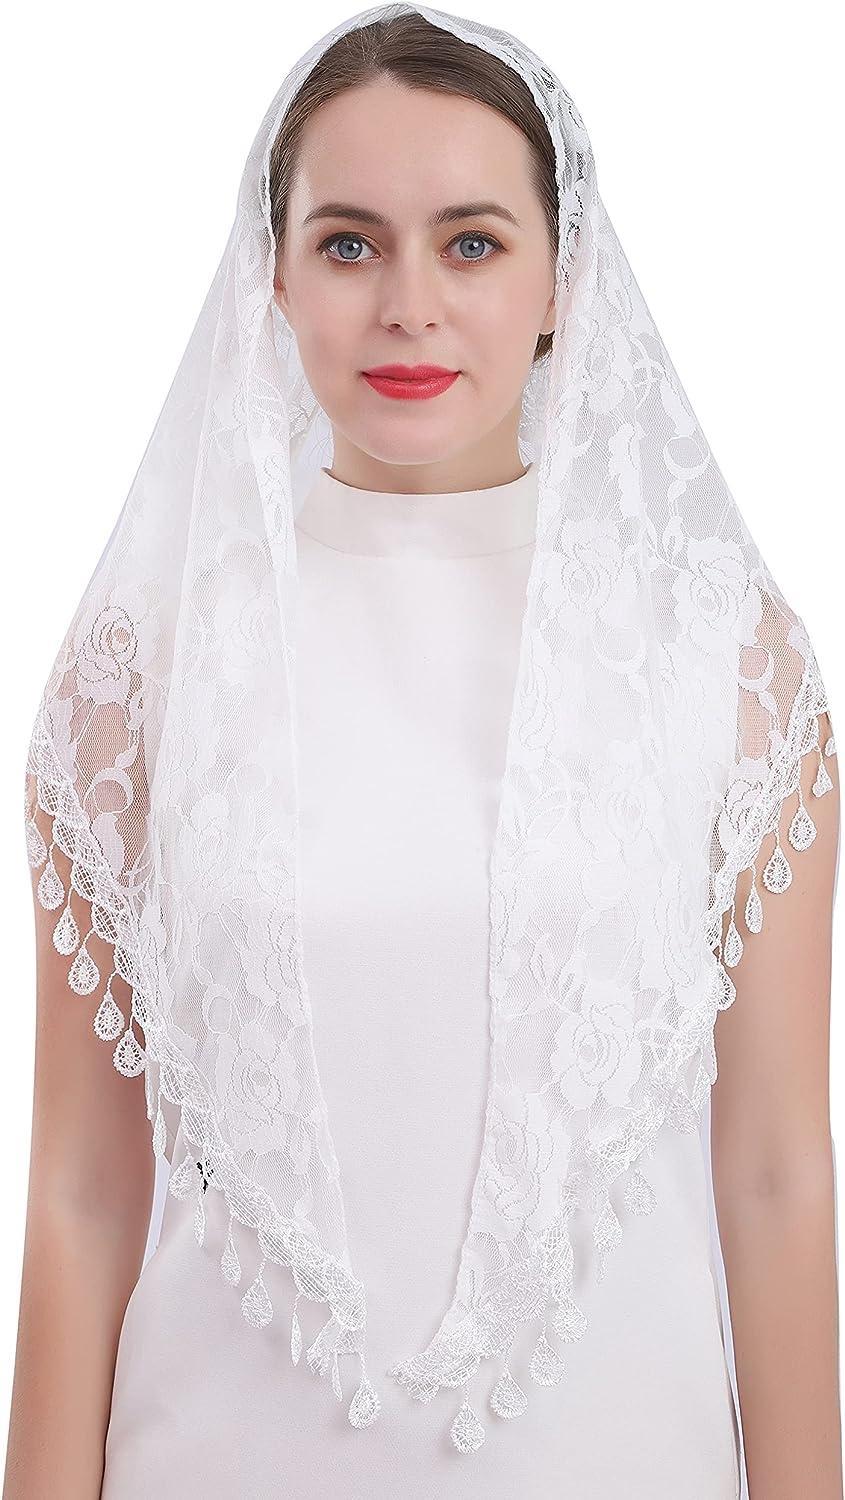 Triangle Lace Veil Mantilla Veil Shawl or Latin Scarf Mass Head Cover with Fringe Lace